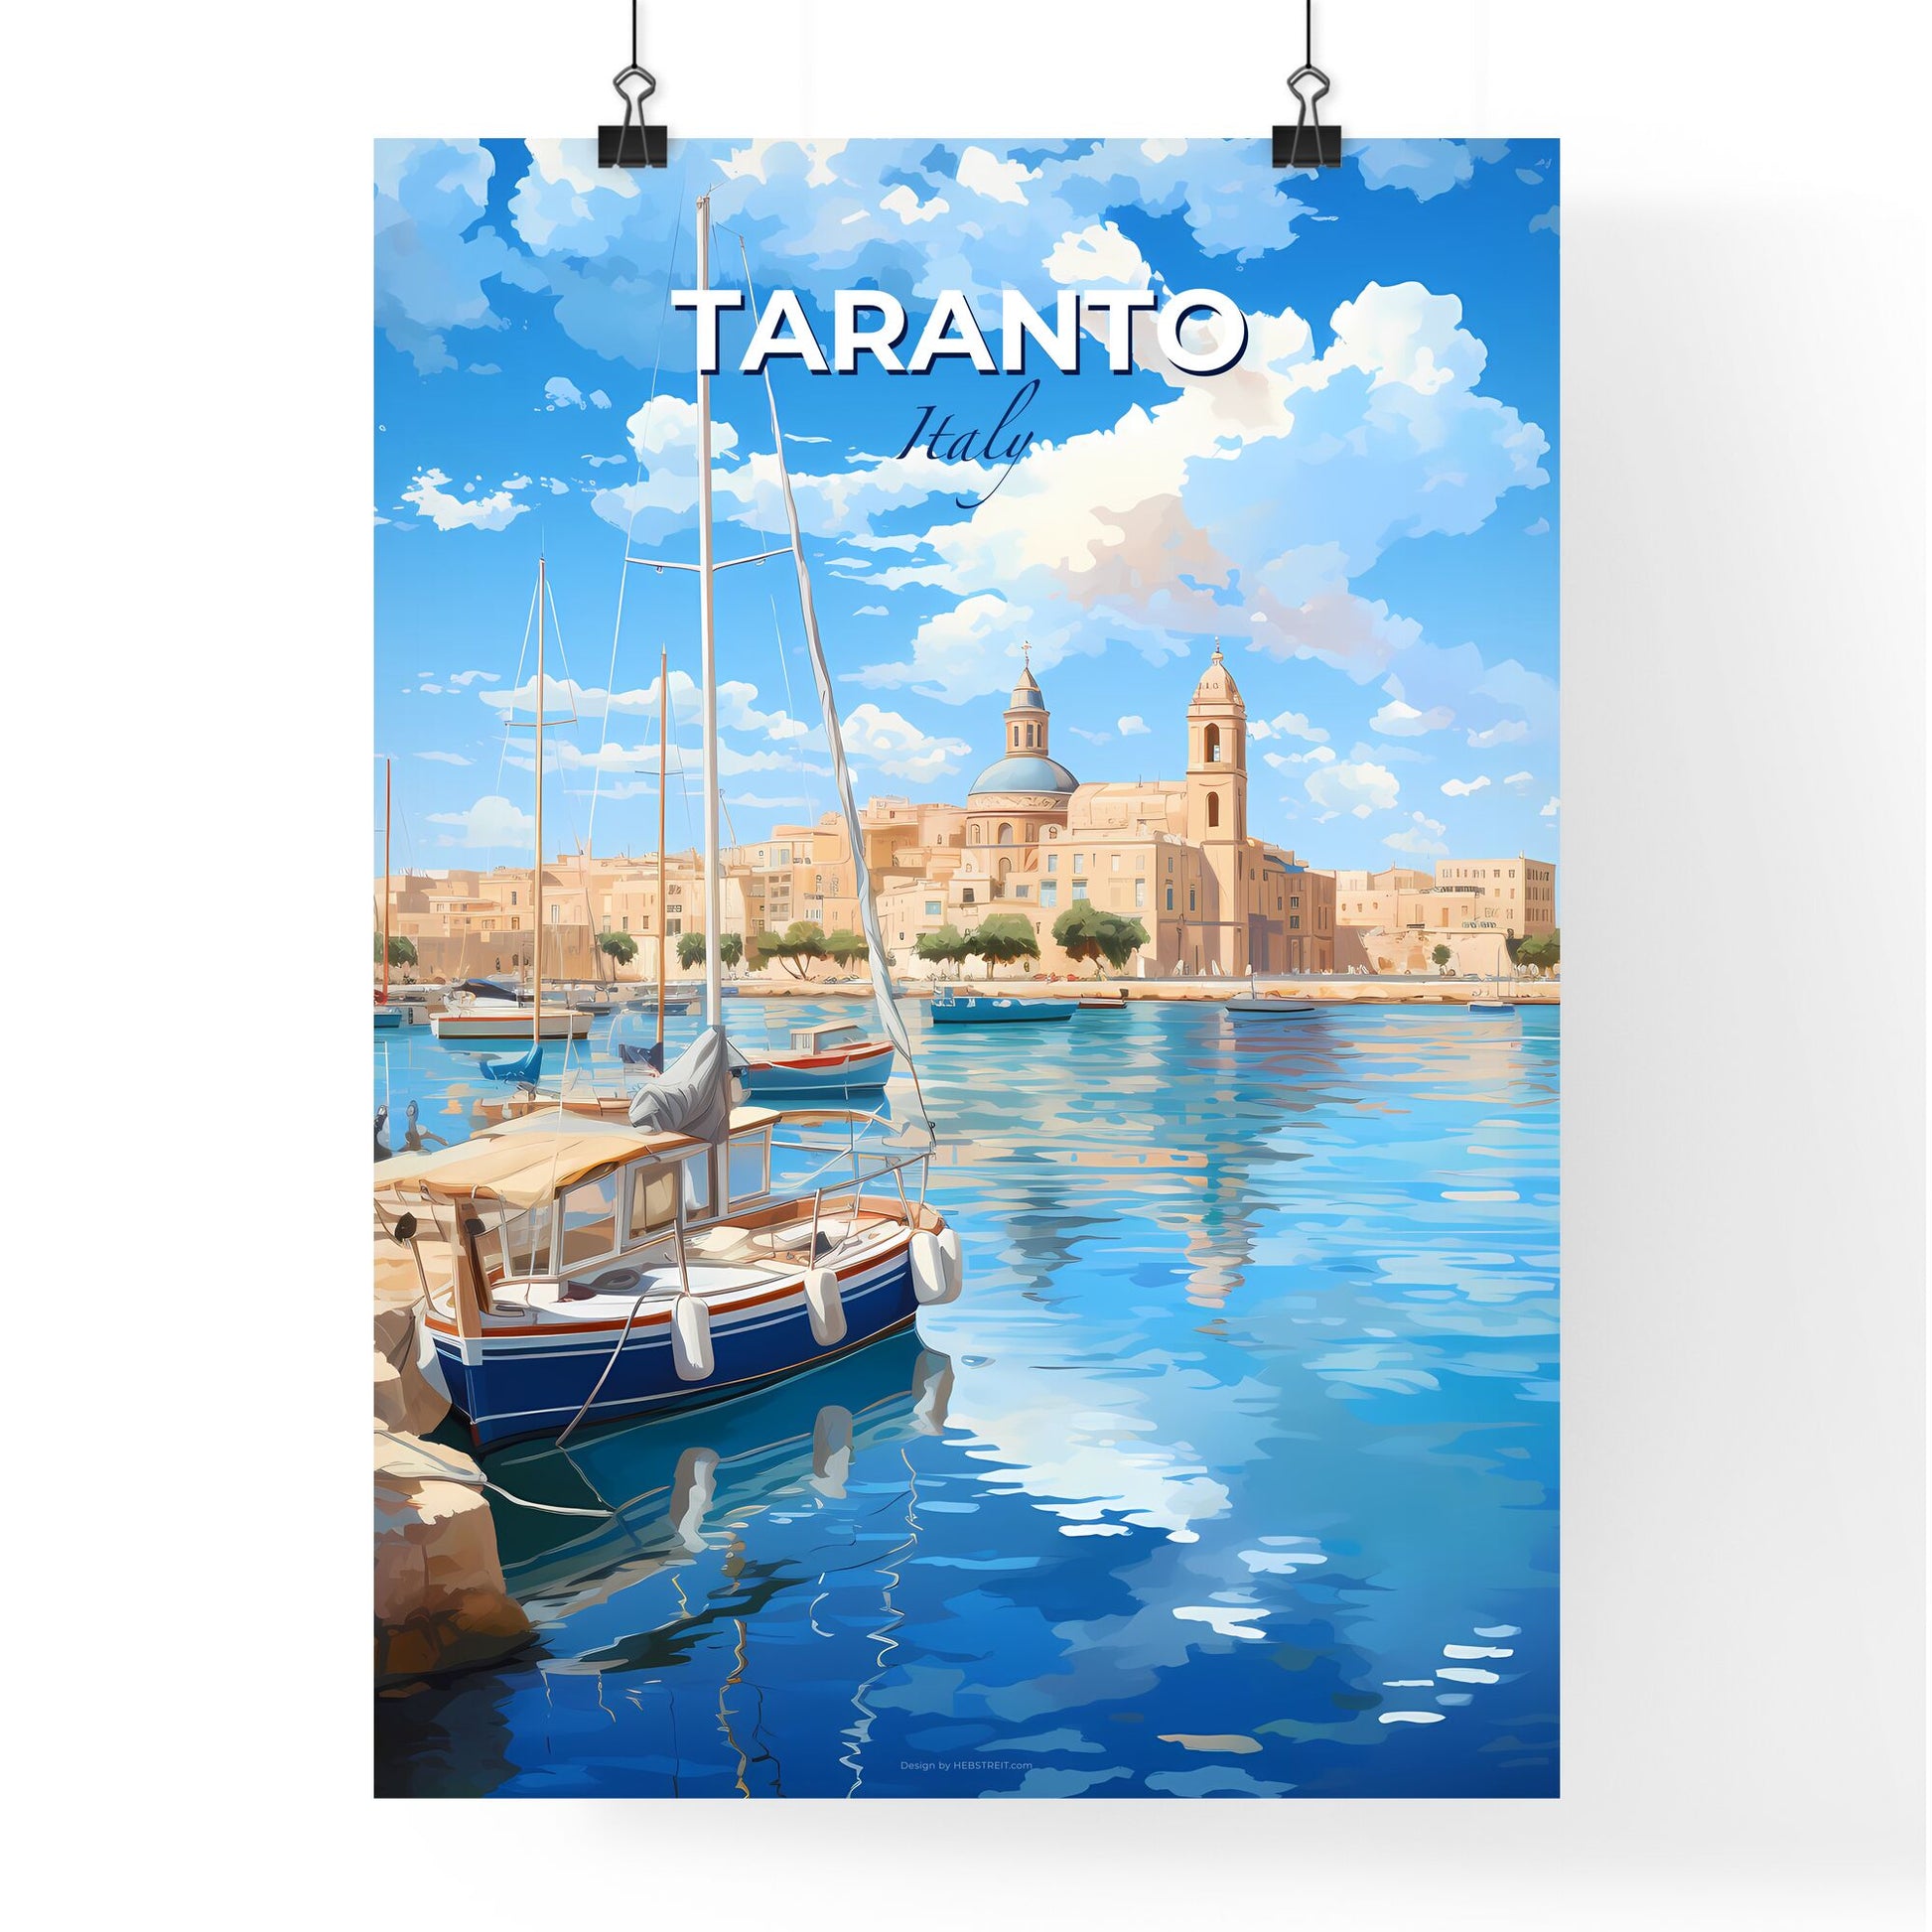 Taranto Italy Skyline - A Painting Of A Harbor With Boats And Buildings In The Background - Customizable Travel Gift Default Title